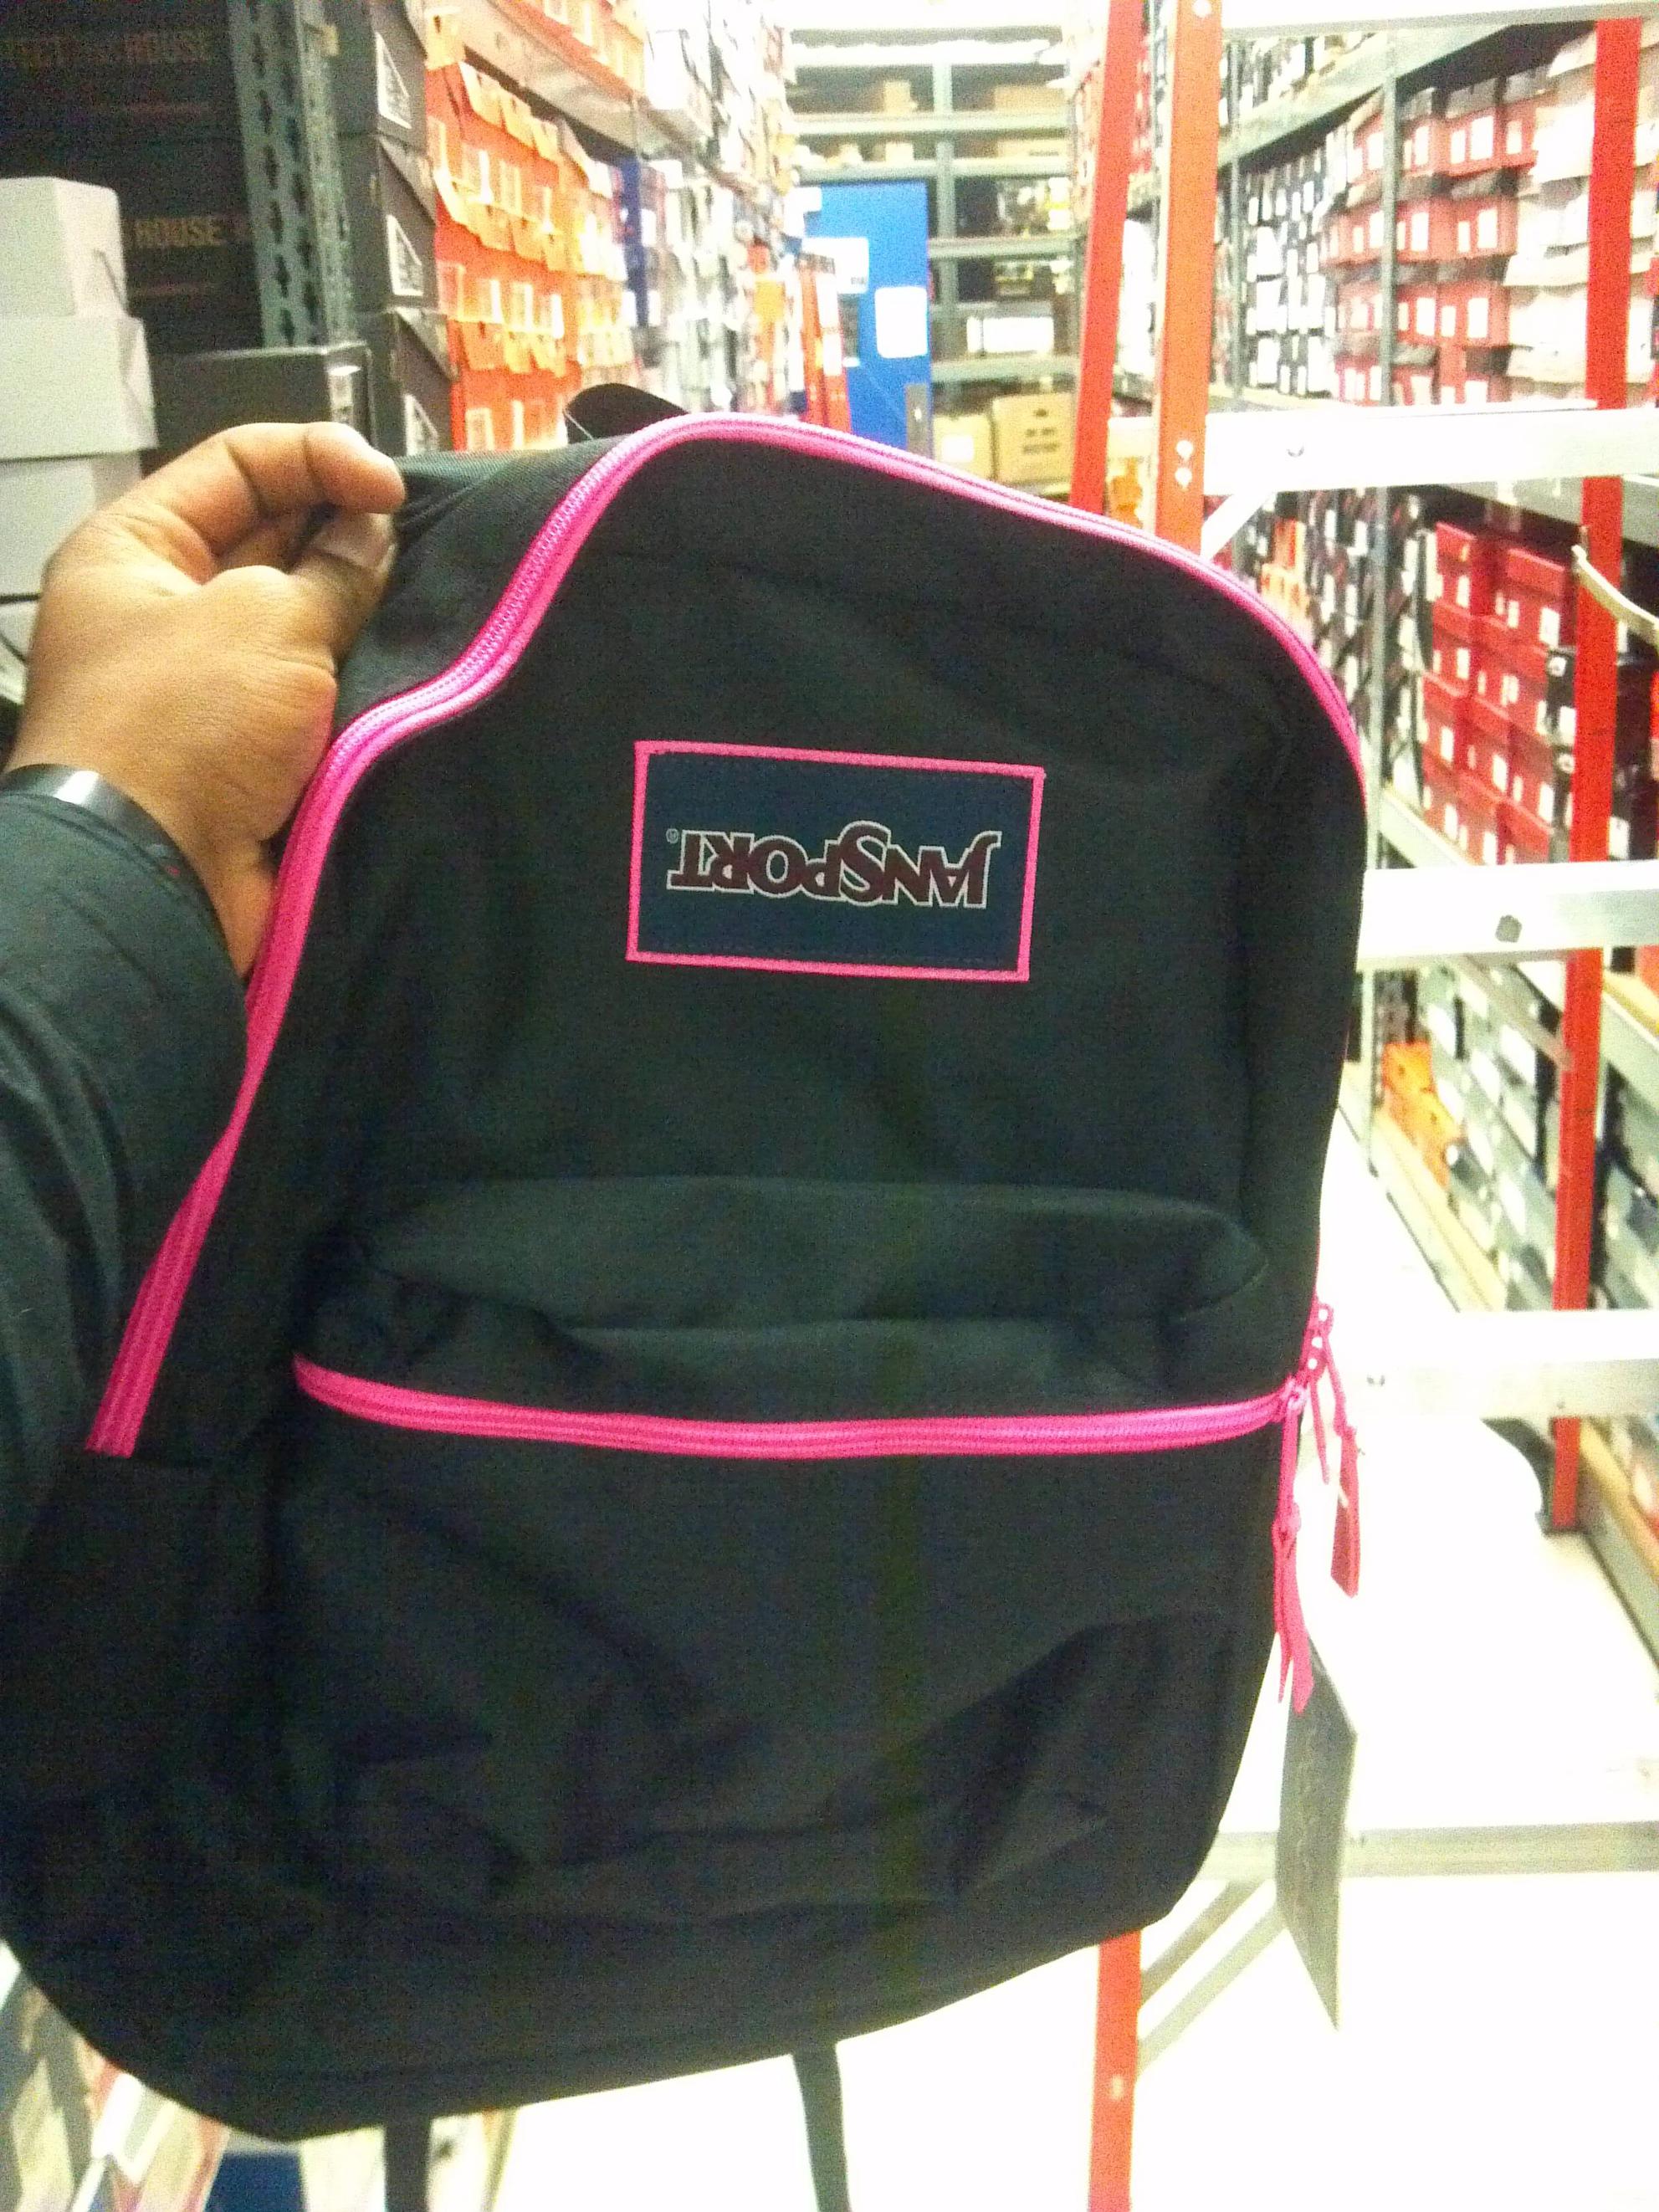 Old JanSport Logo - This JanSport backpack came with the tag upside down